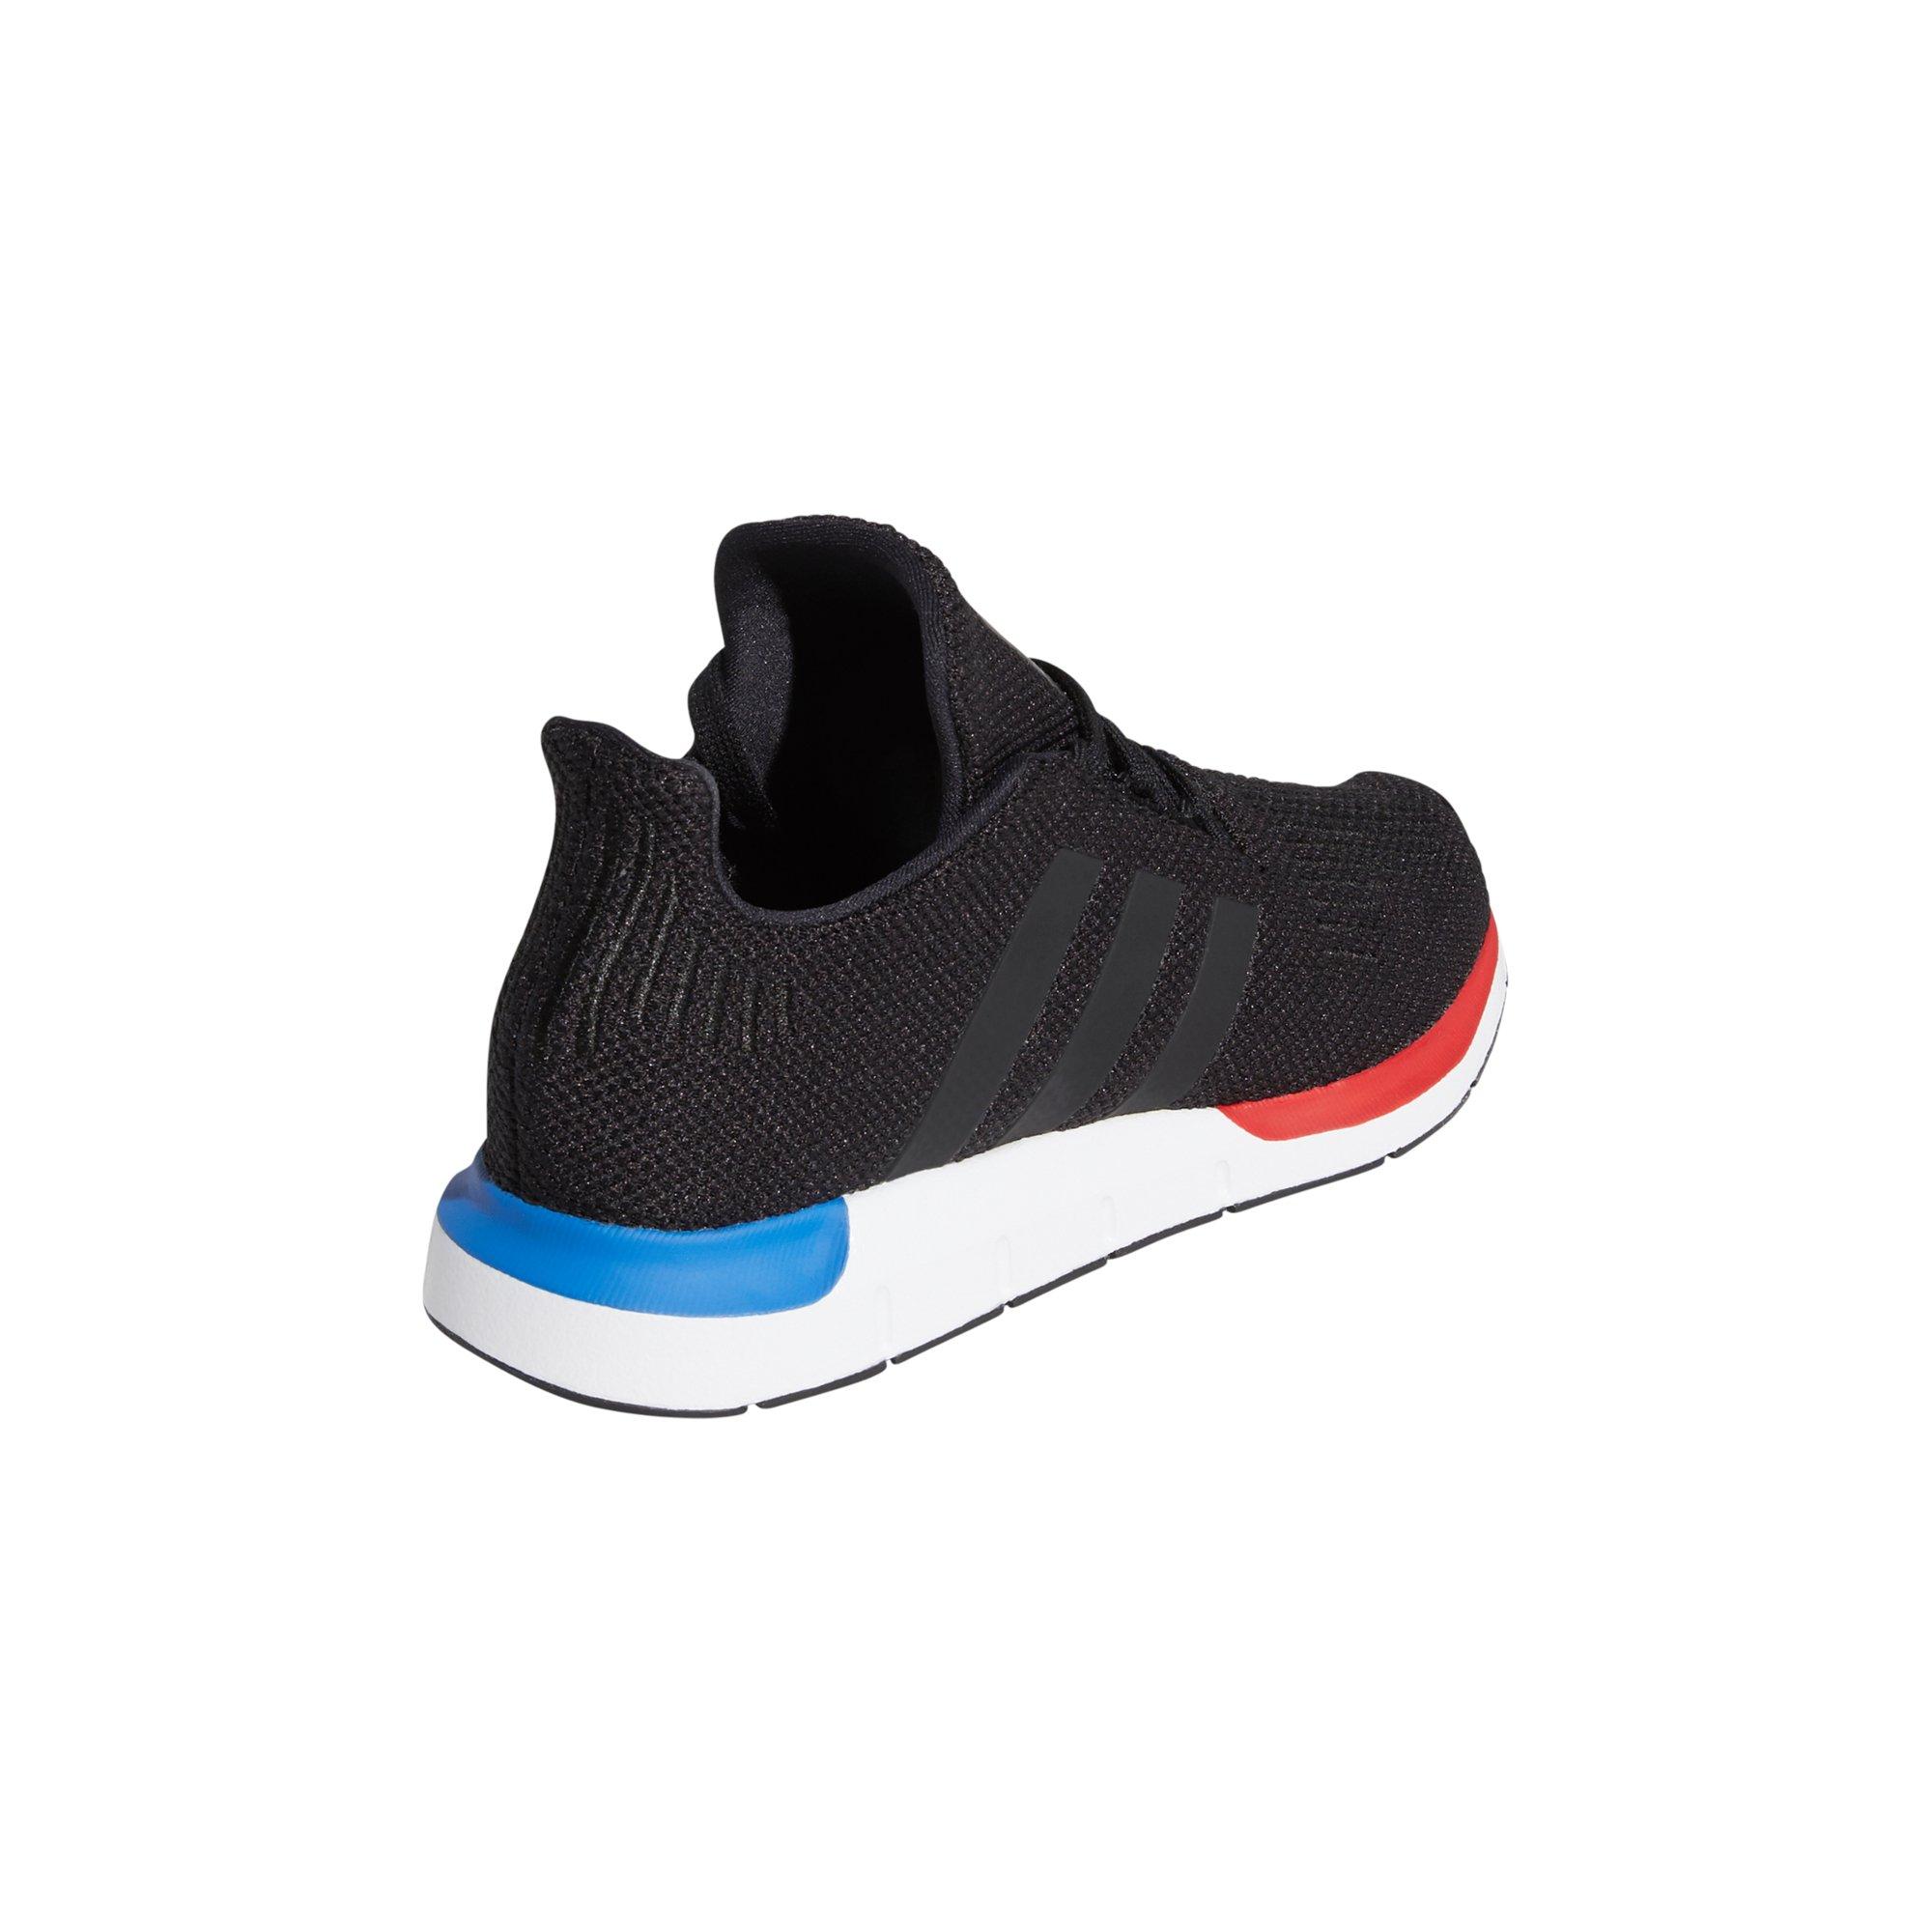 black adidas with red and blue